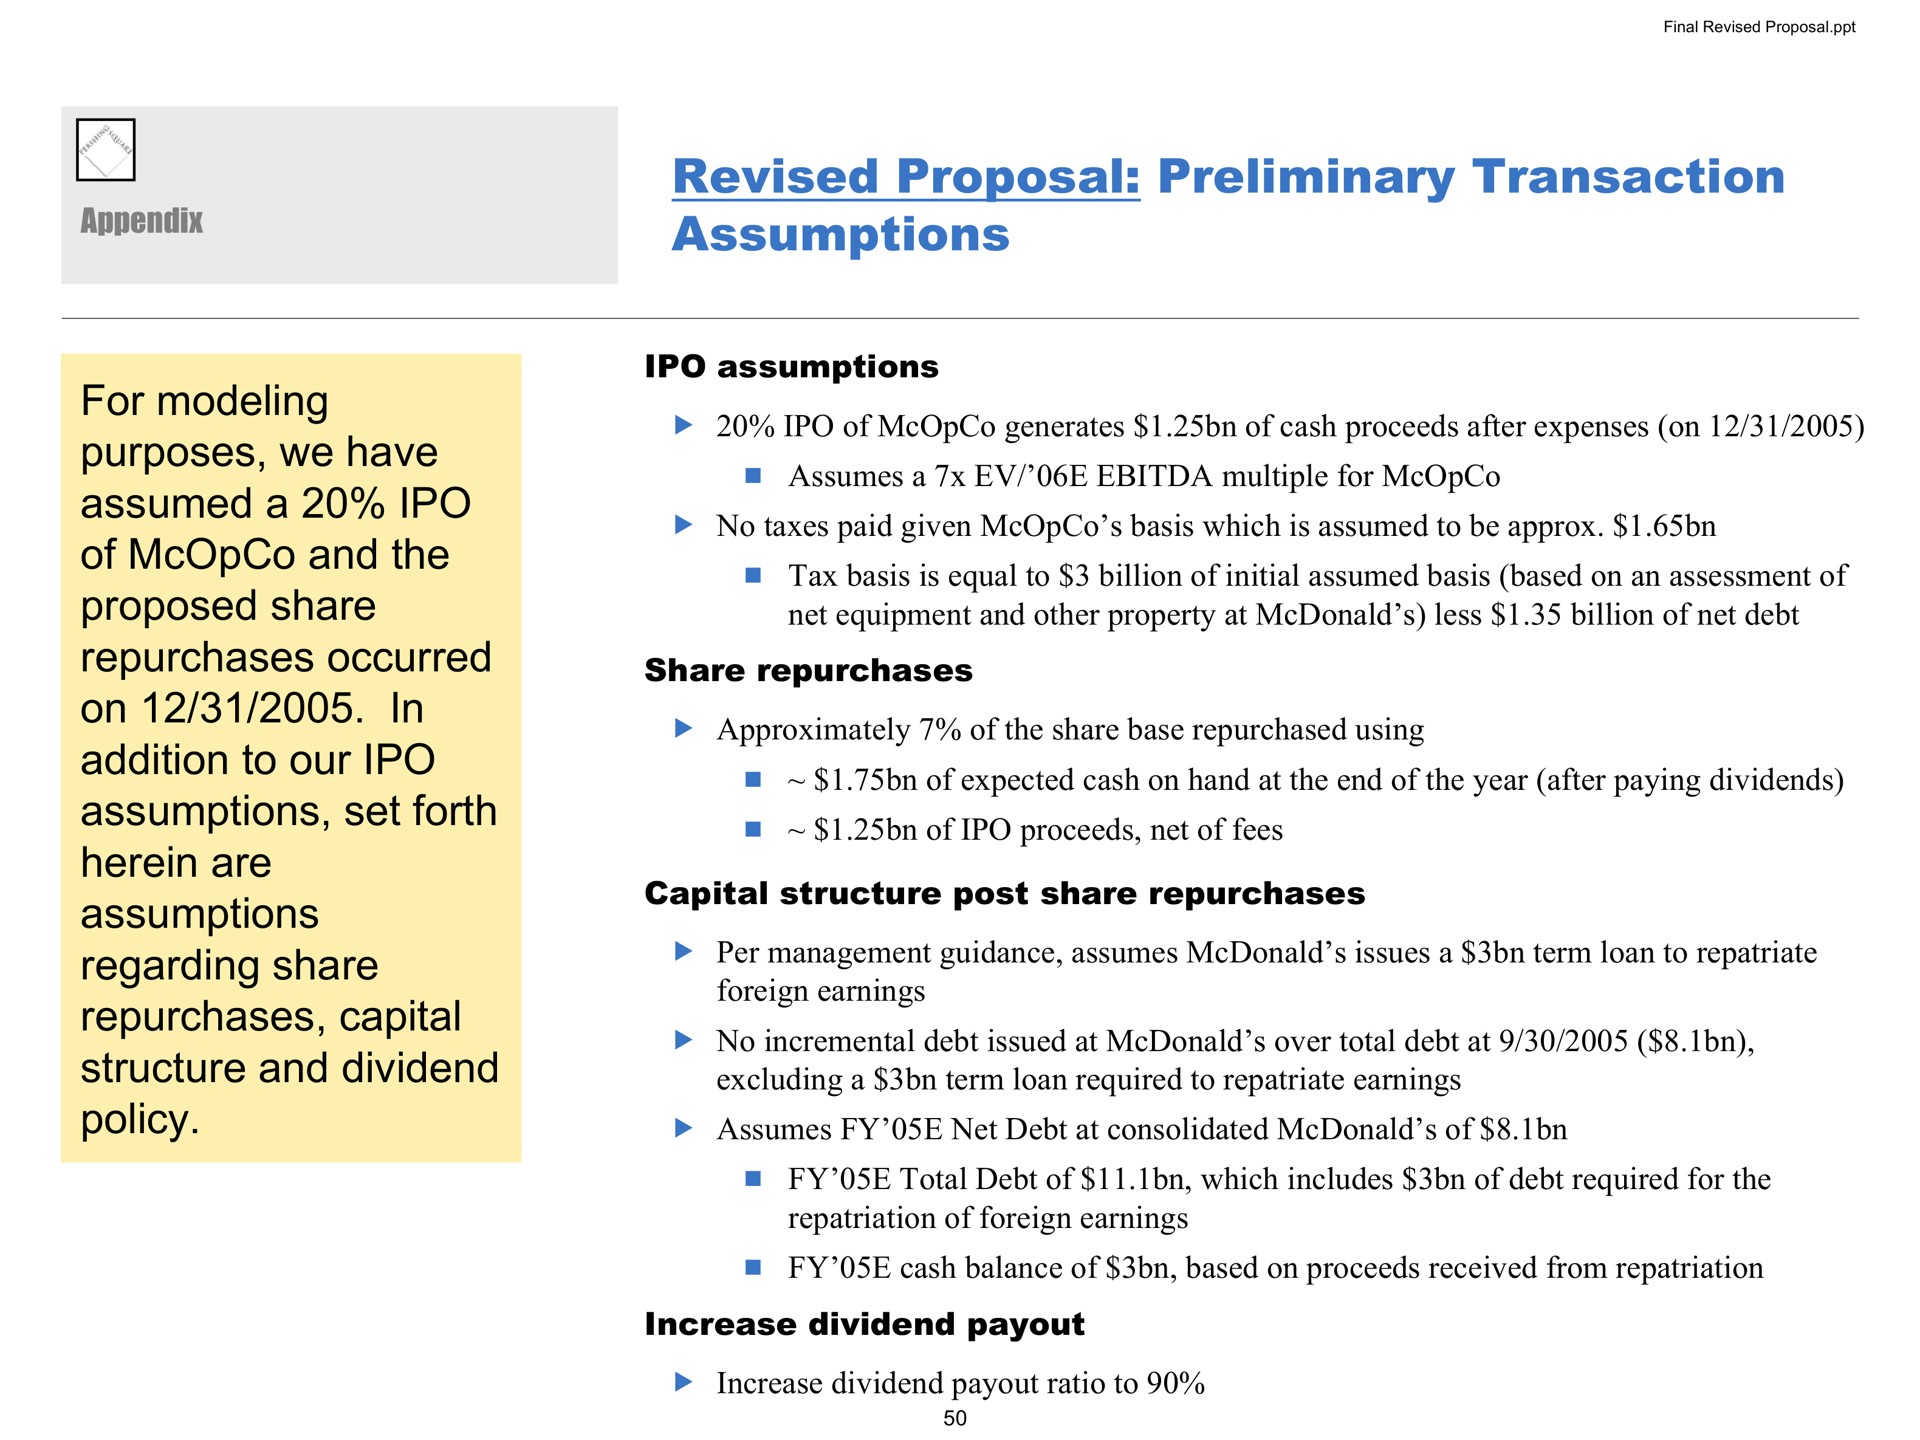 revised proposal preliminary transaction assumptions for modeling purposes we have assumed a of and the proposed share repurchases occurred on in addition to our assumptions set forth herein are assumptions regarding share repurchases capital structure and dividend policy | Pershing Square